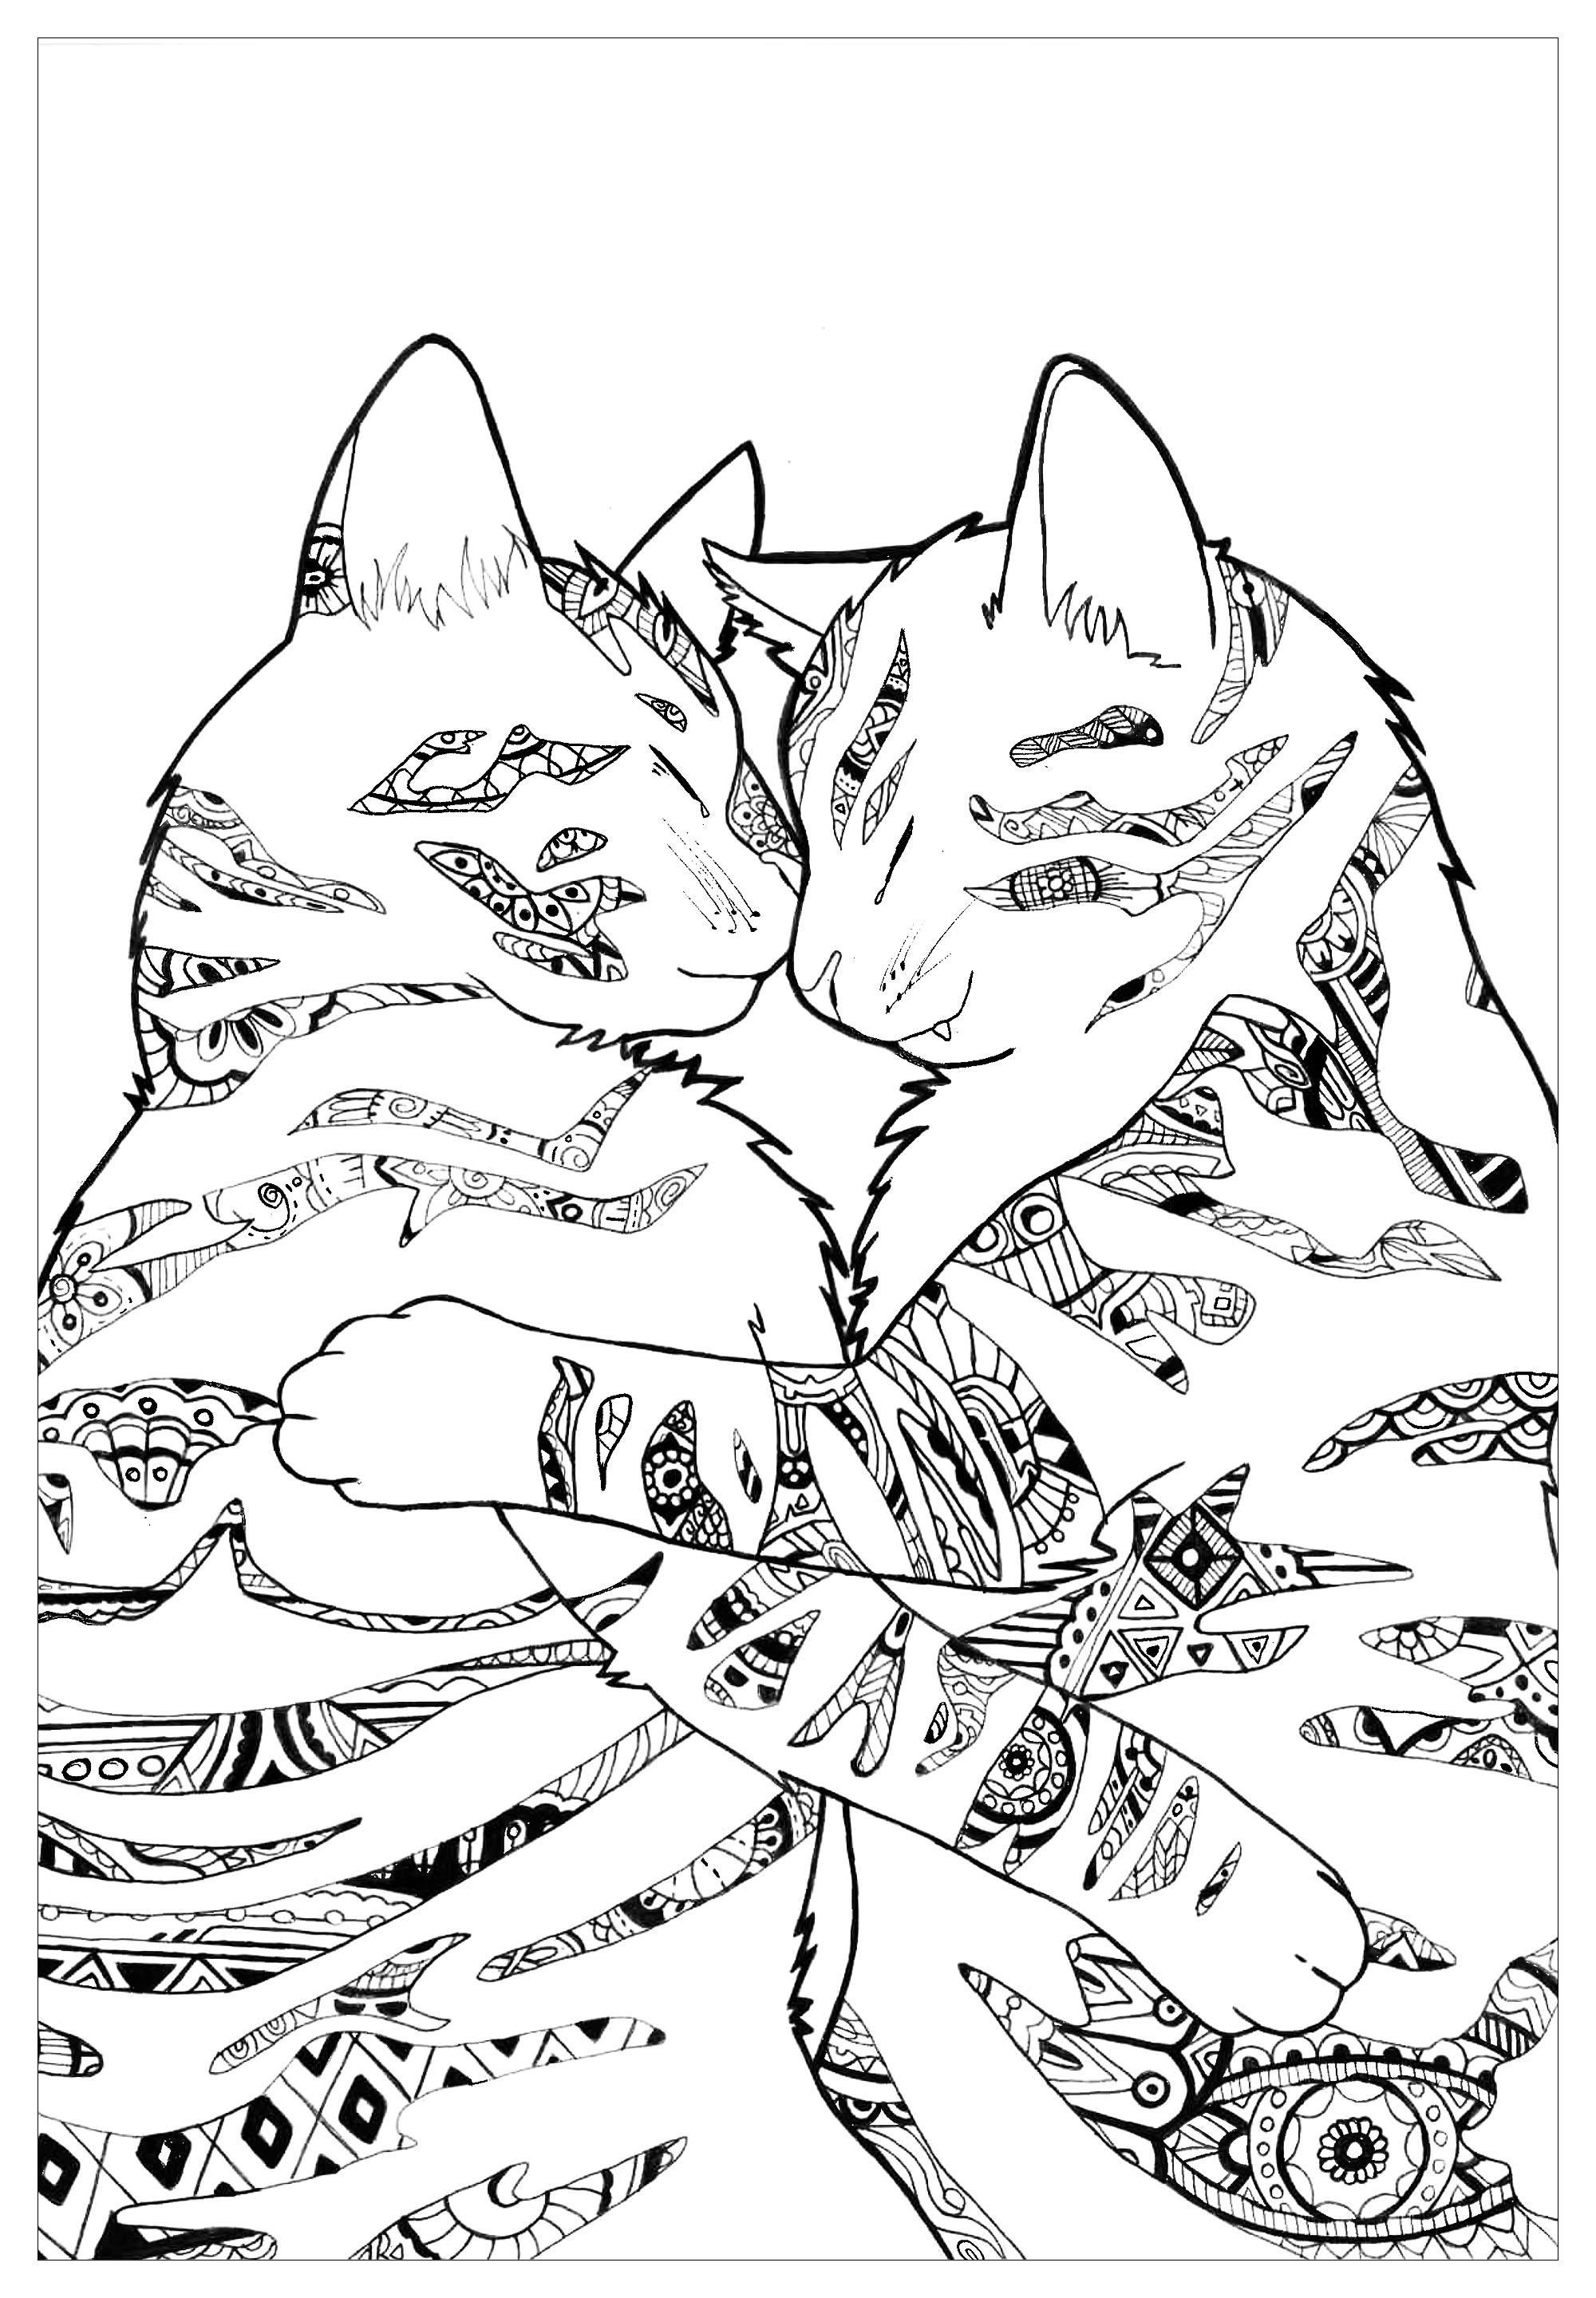 Cats by paulined - Cats Adult Coloring Pages